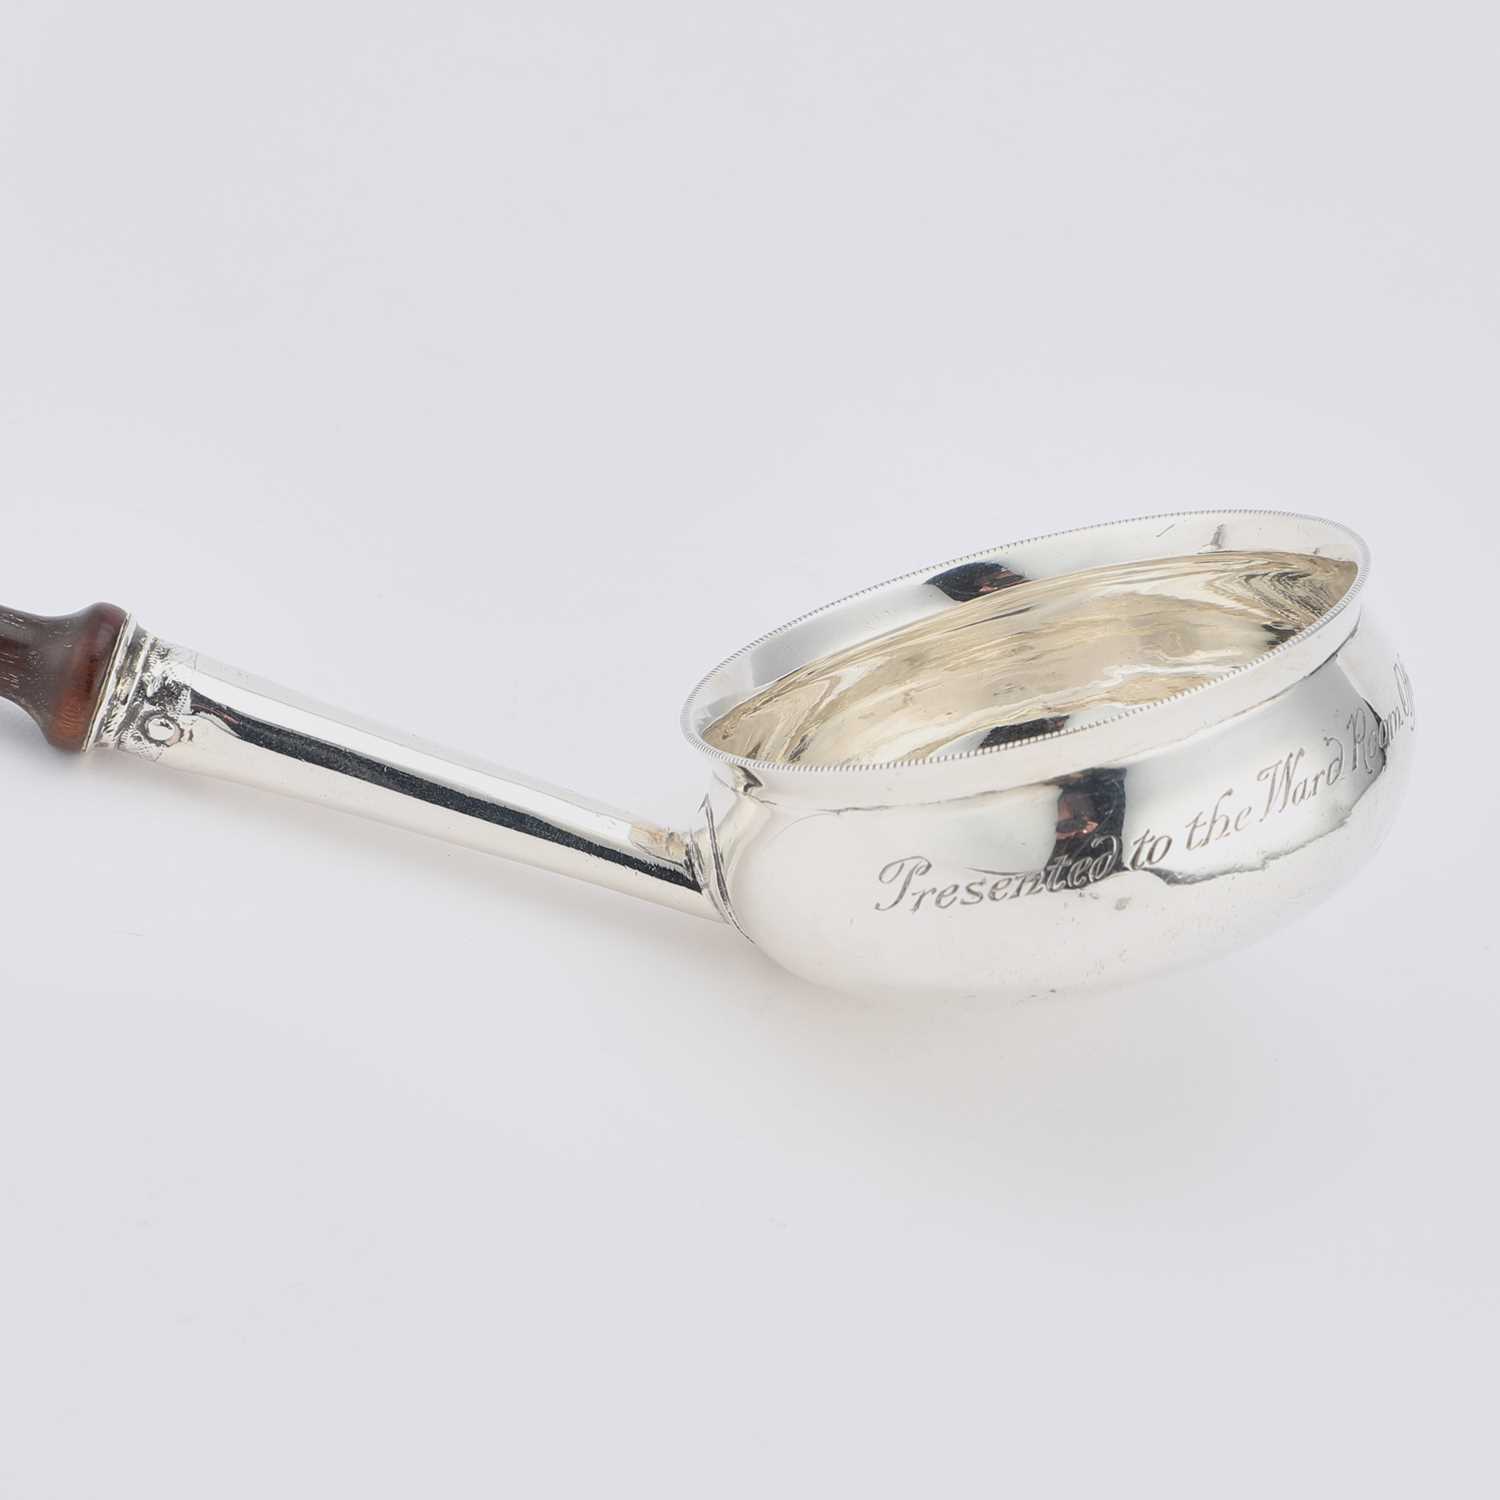 A GEORGE III SILVER TODDY LADLE - Image 2 of 2